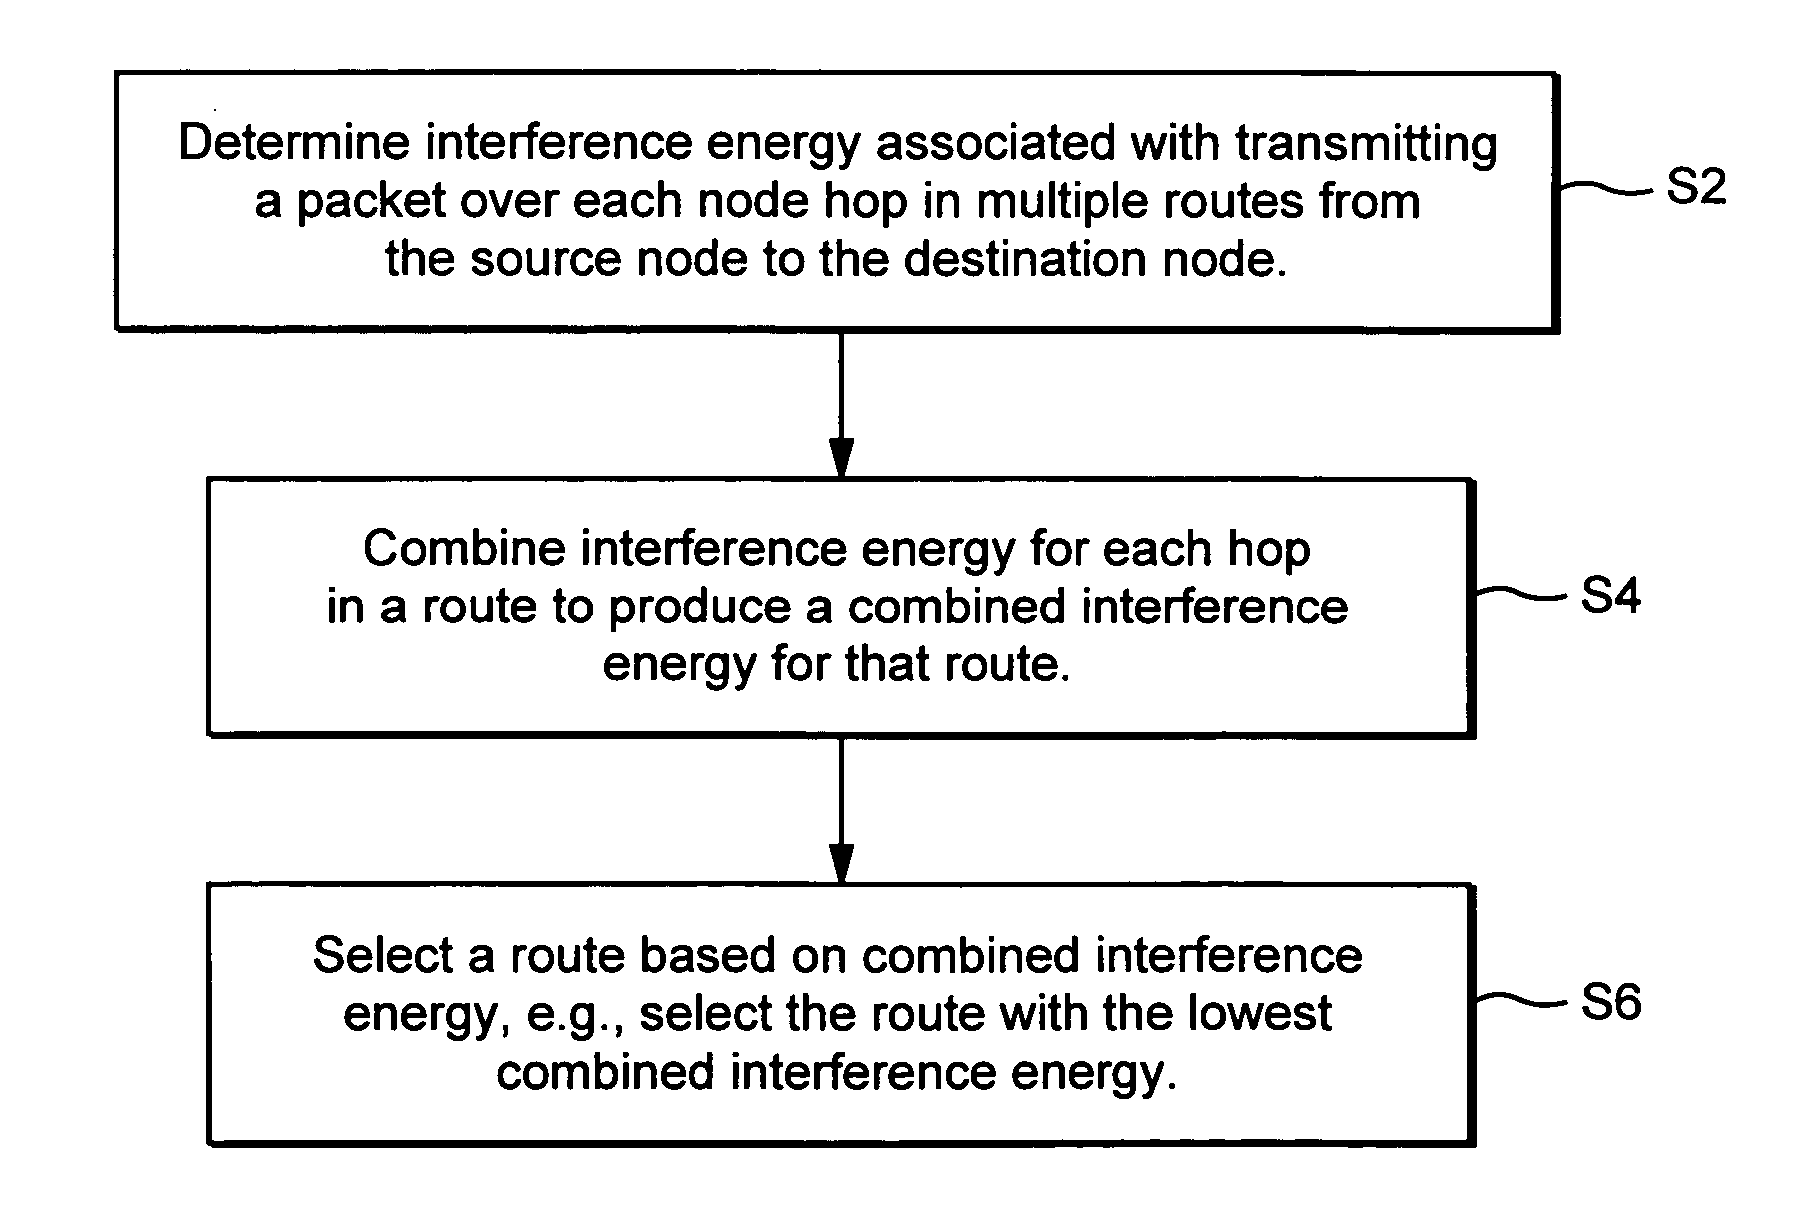 Interference-based routing in a wireless mesh network